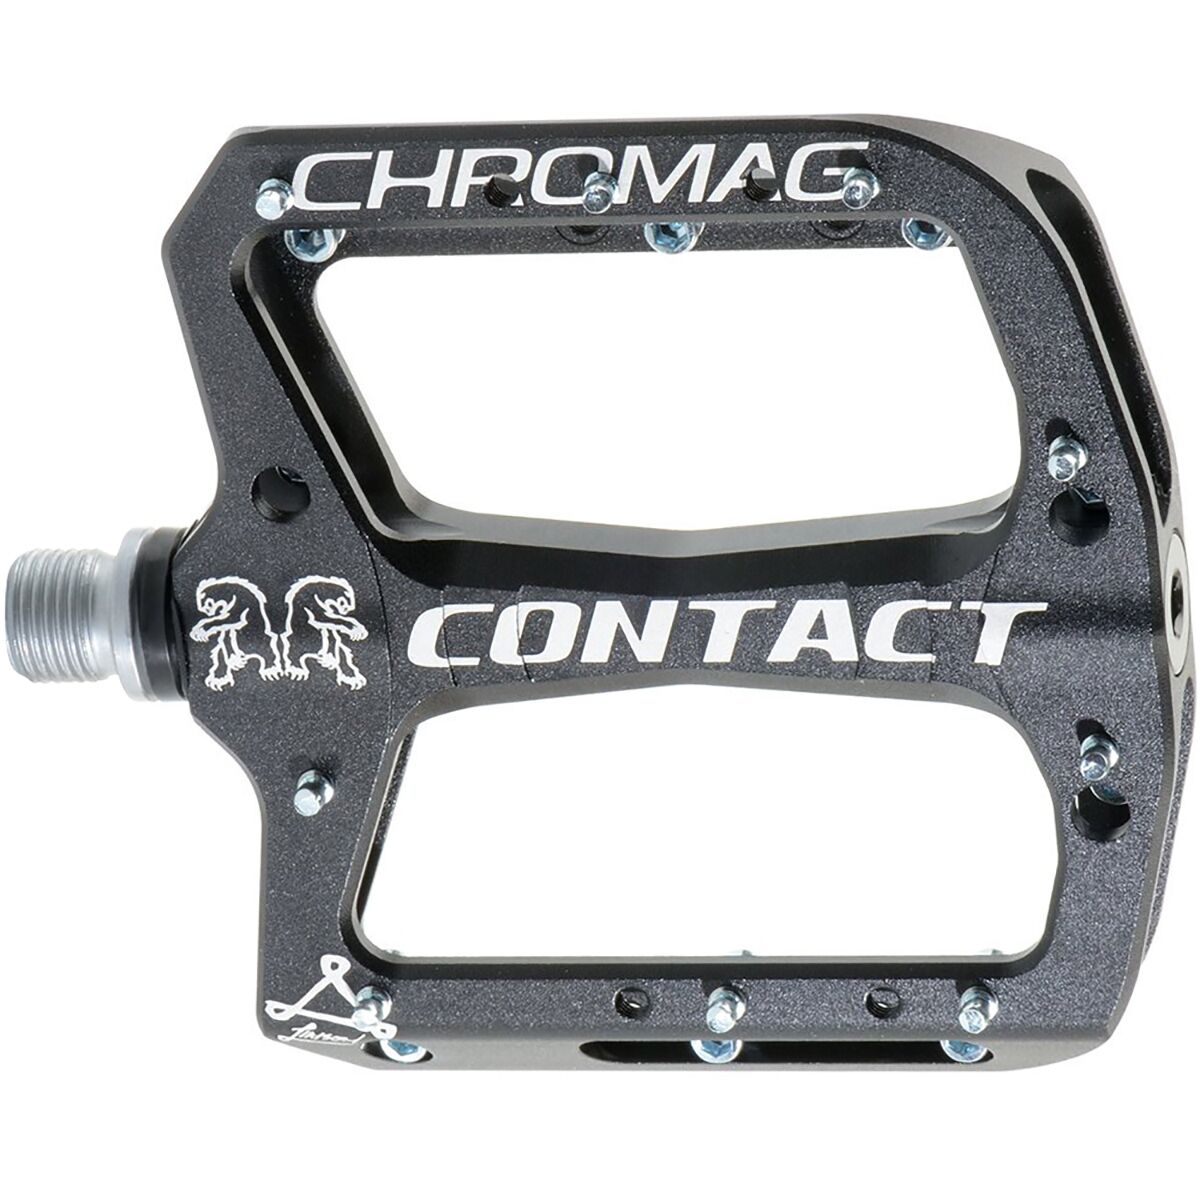 Chromag Contact Pedals